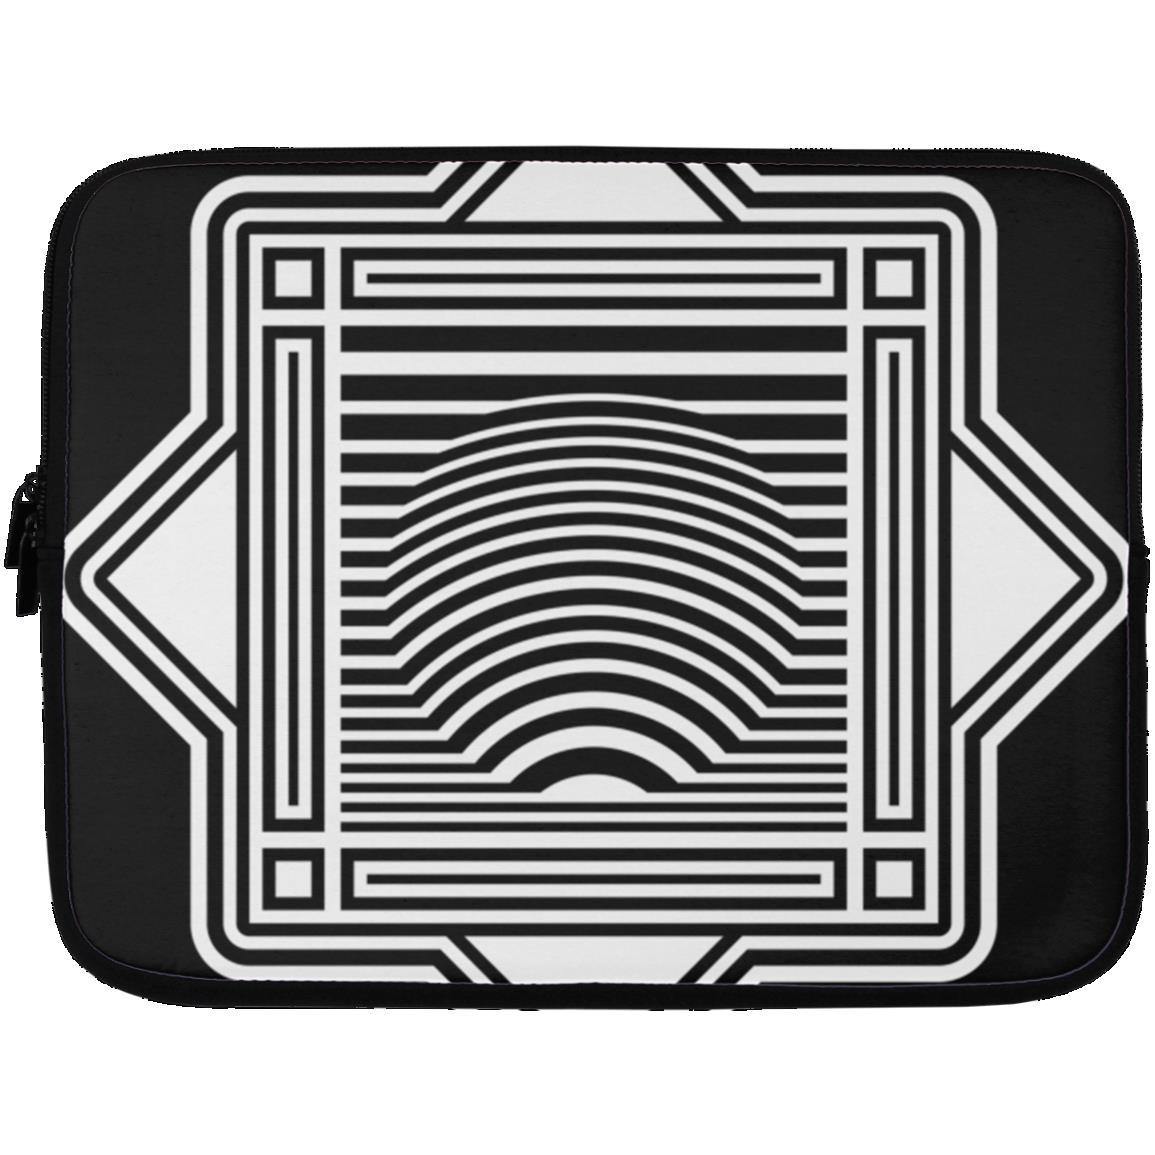 Crop Circle Laptop Sleeve - Whitefield Hill - Shapes of Wisdom